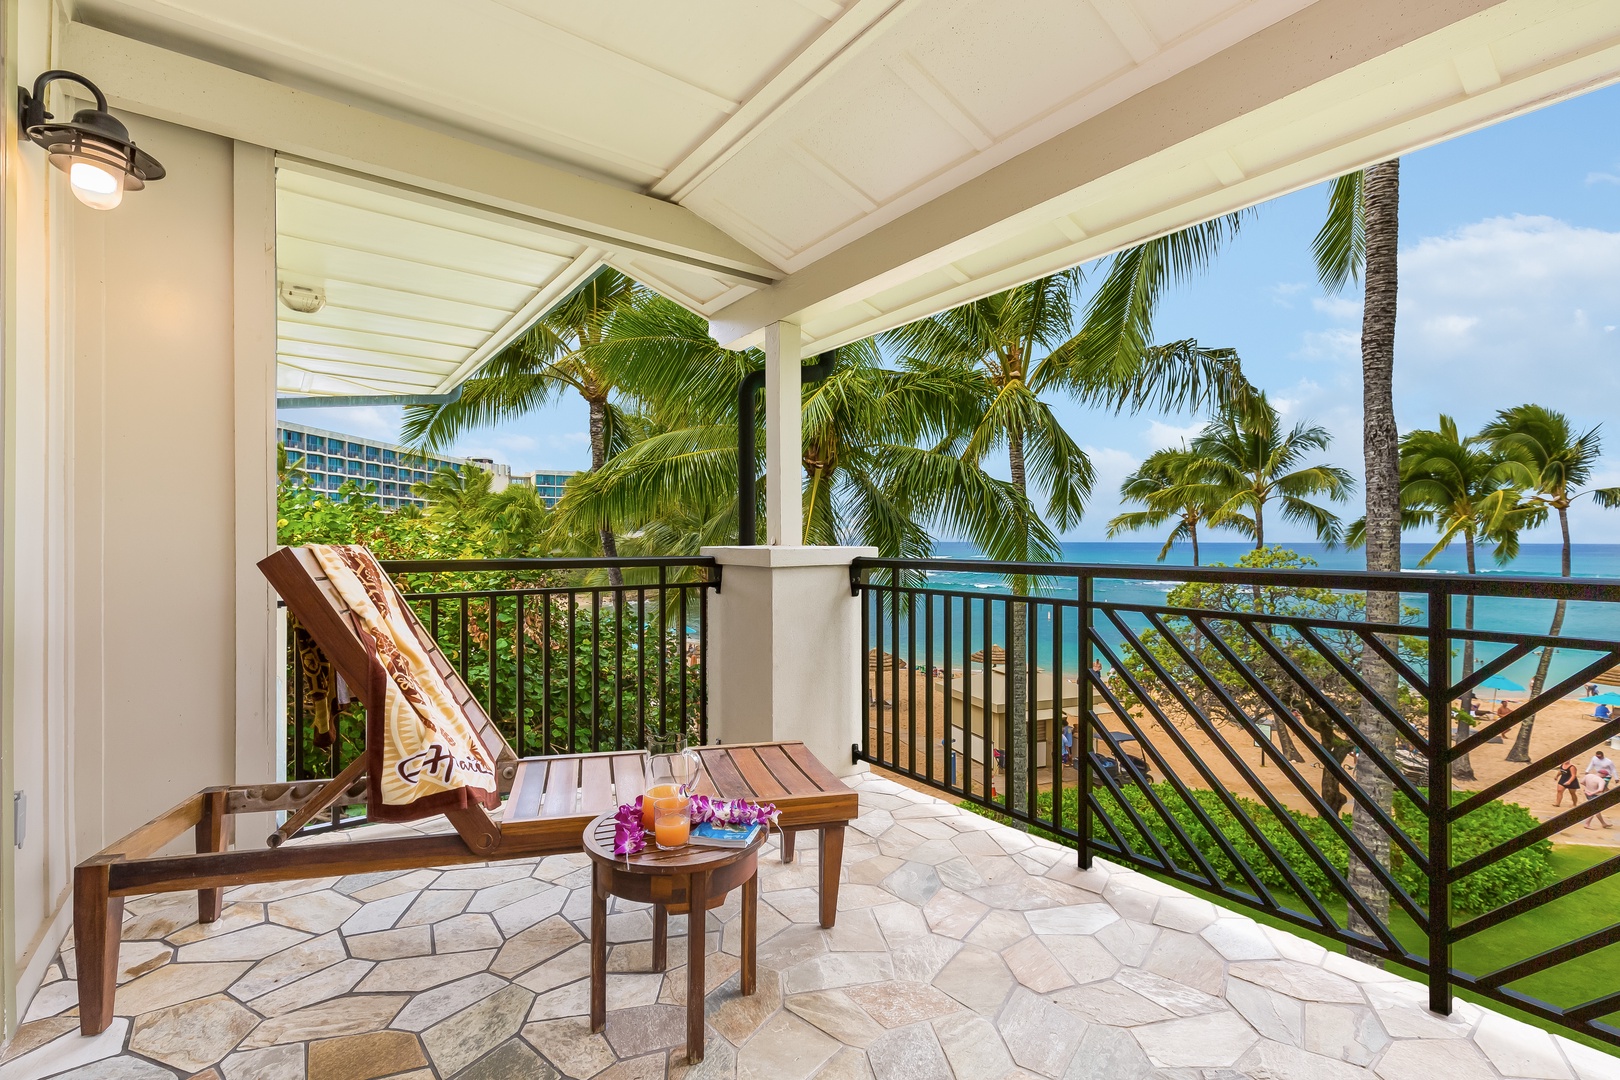 Kahuku Vacation Rentals, Turtle Bay Villas 301 - Boasting the closest proximity to the 850-Acre Turtle Bay Resort and world-famous North Shore of Oahu, this spacious condo offers everything you’d desire for an unforgettable stay and the best ocean views from any 4-bedroom villa